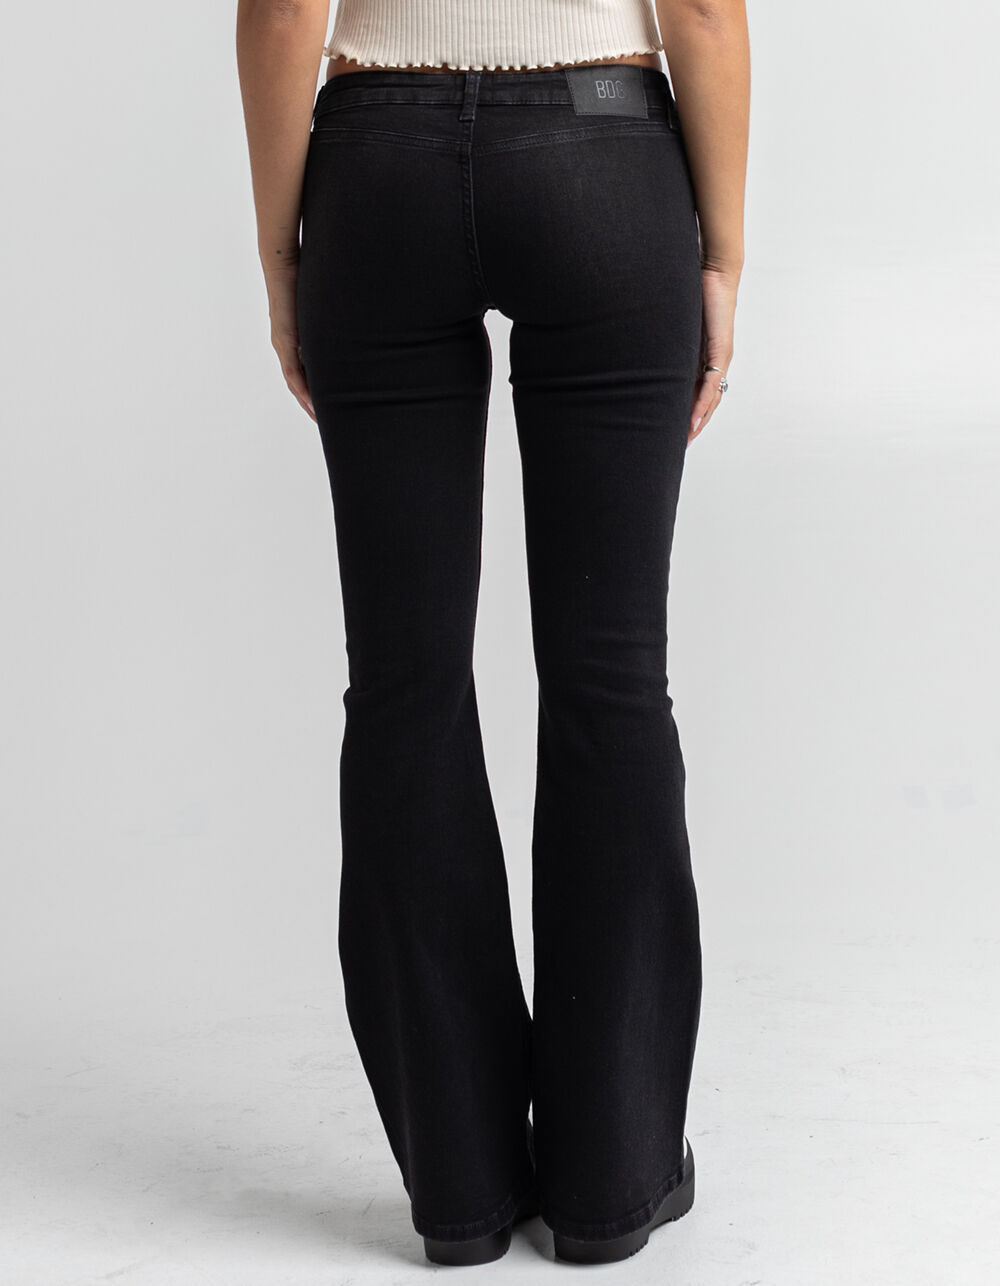 BDG Urban Outfitters Low Rise Stretch Flare Jeans